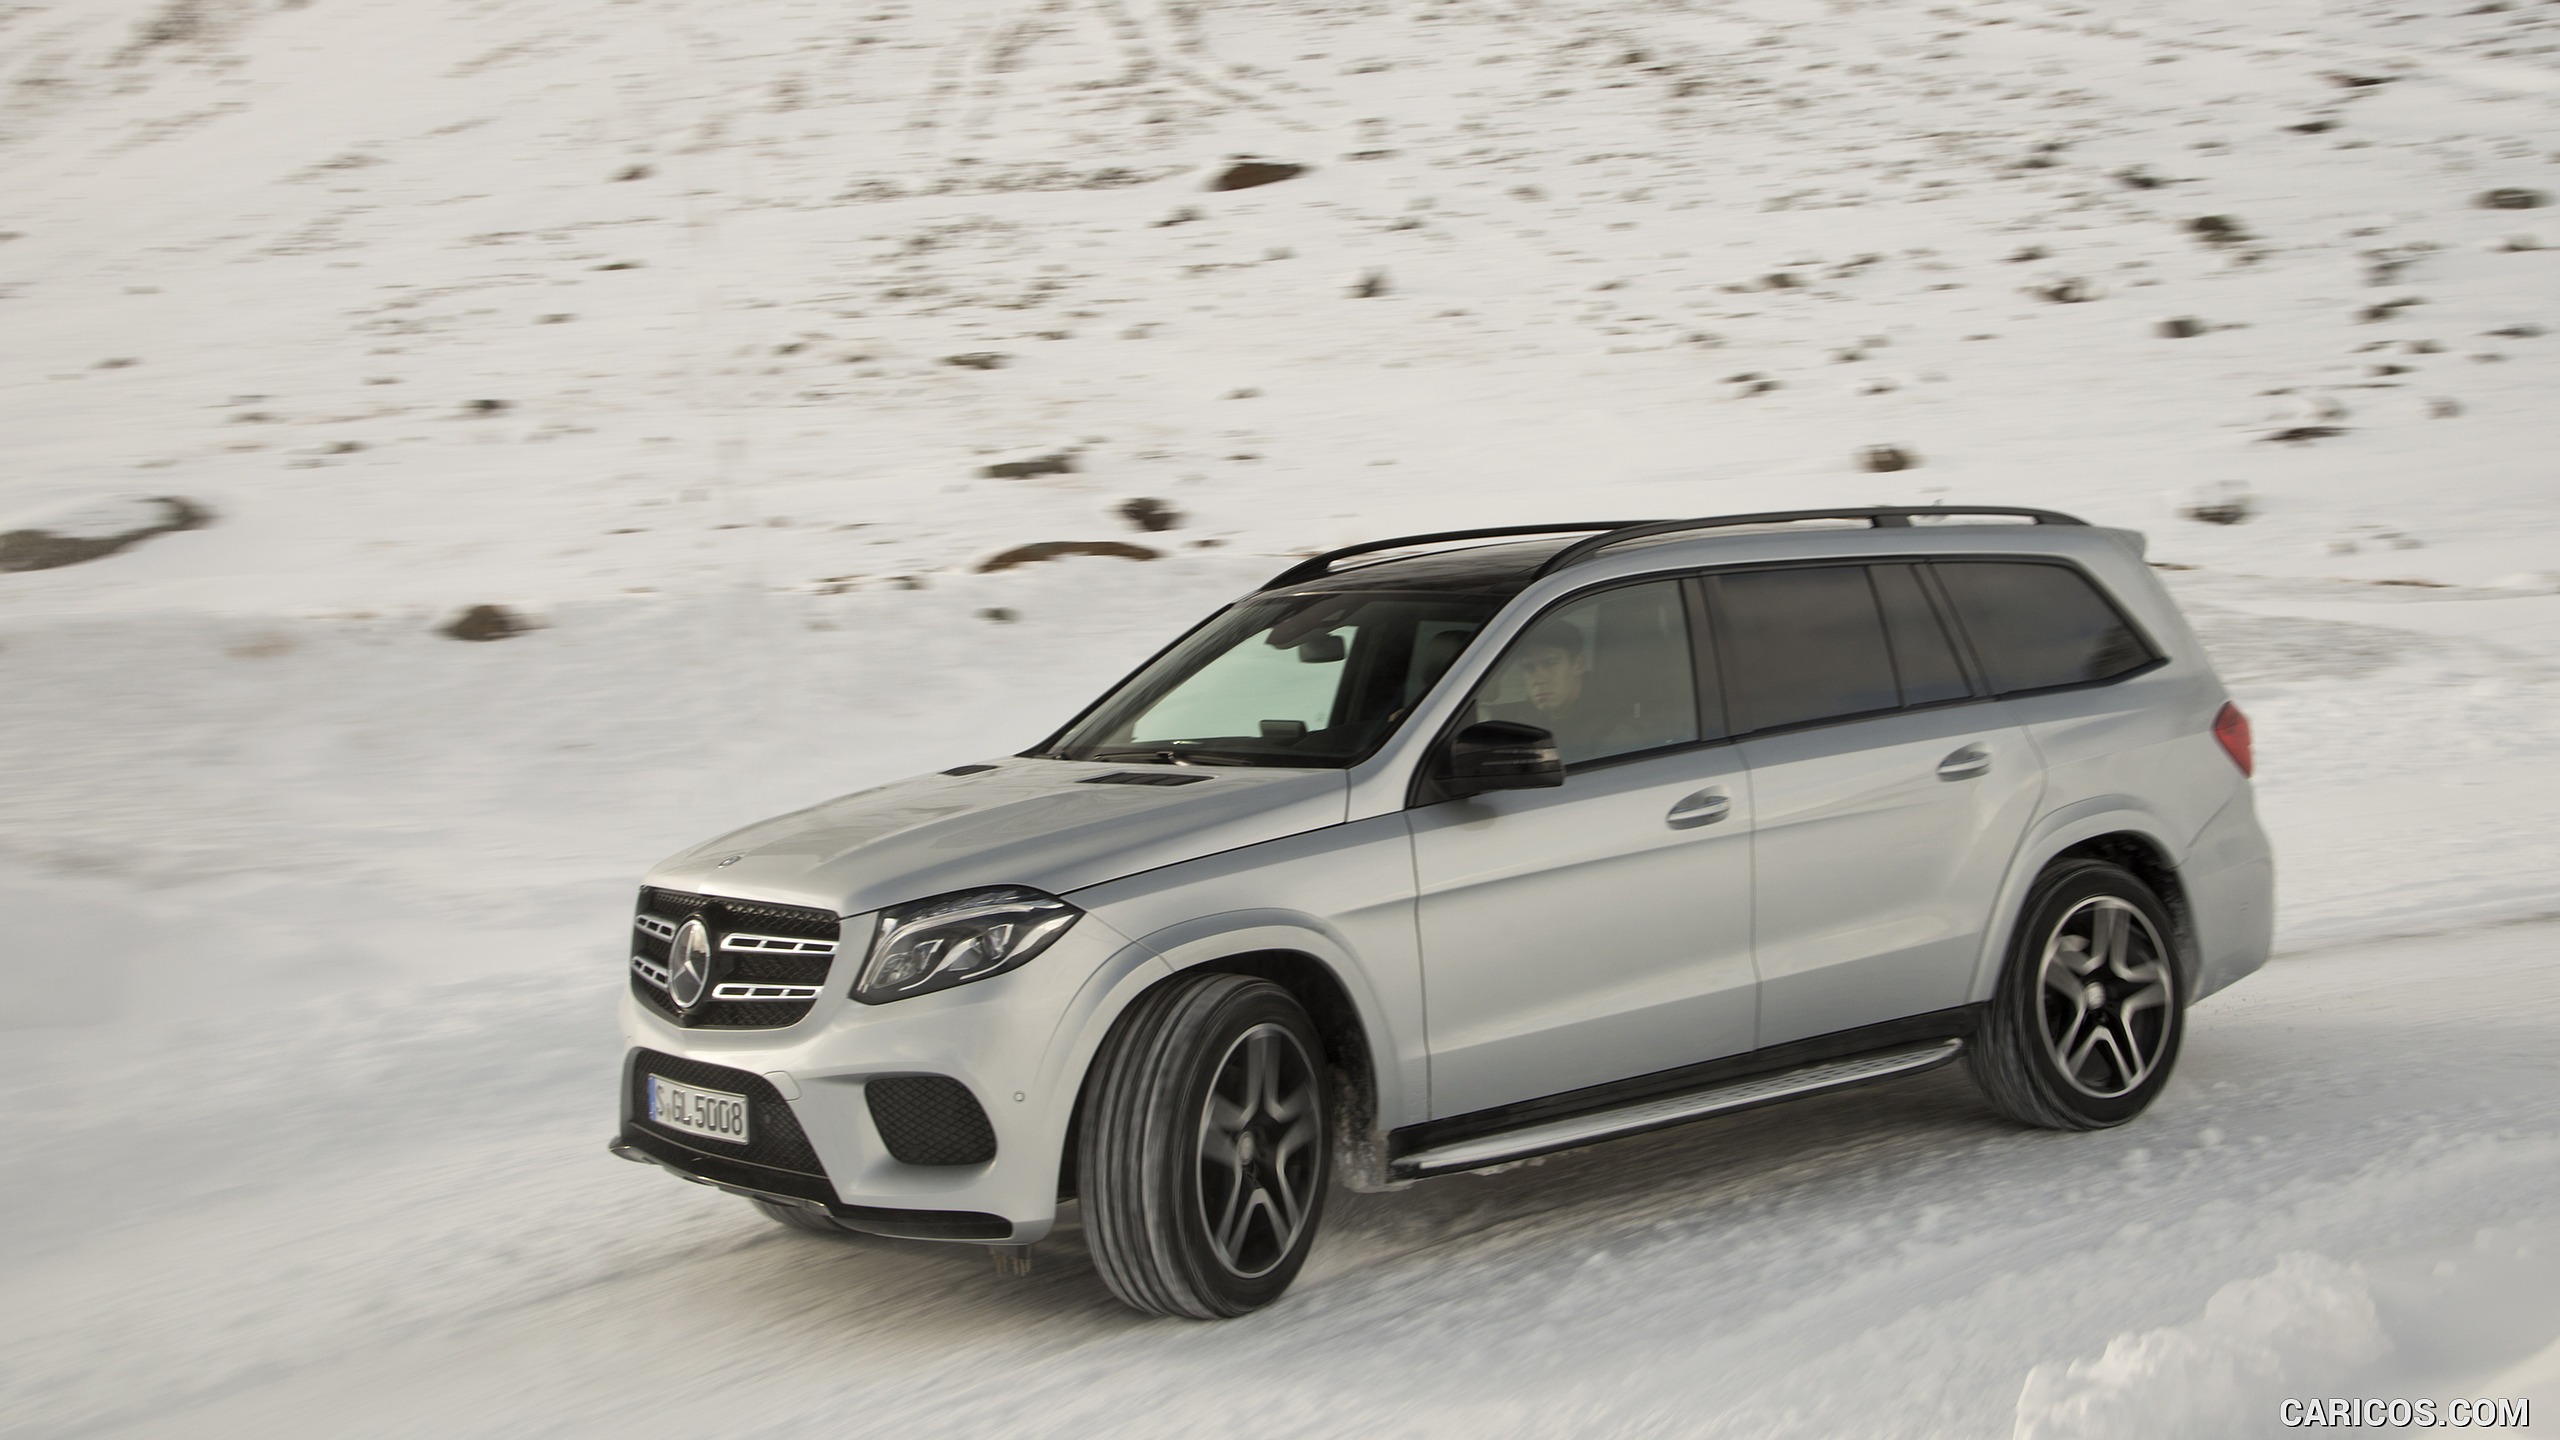 2017 Mercedes-Benz GLS 500 4MATIC AMG Line in Snow - Side, #135 of 255